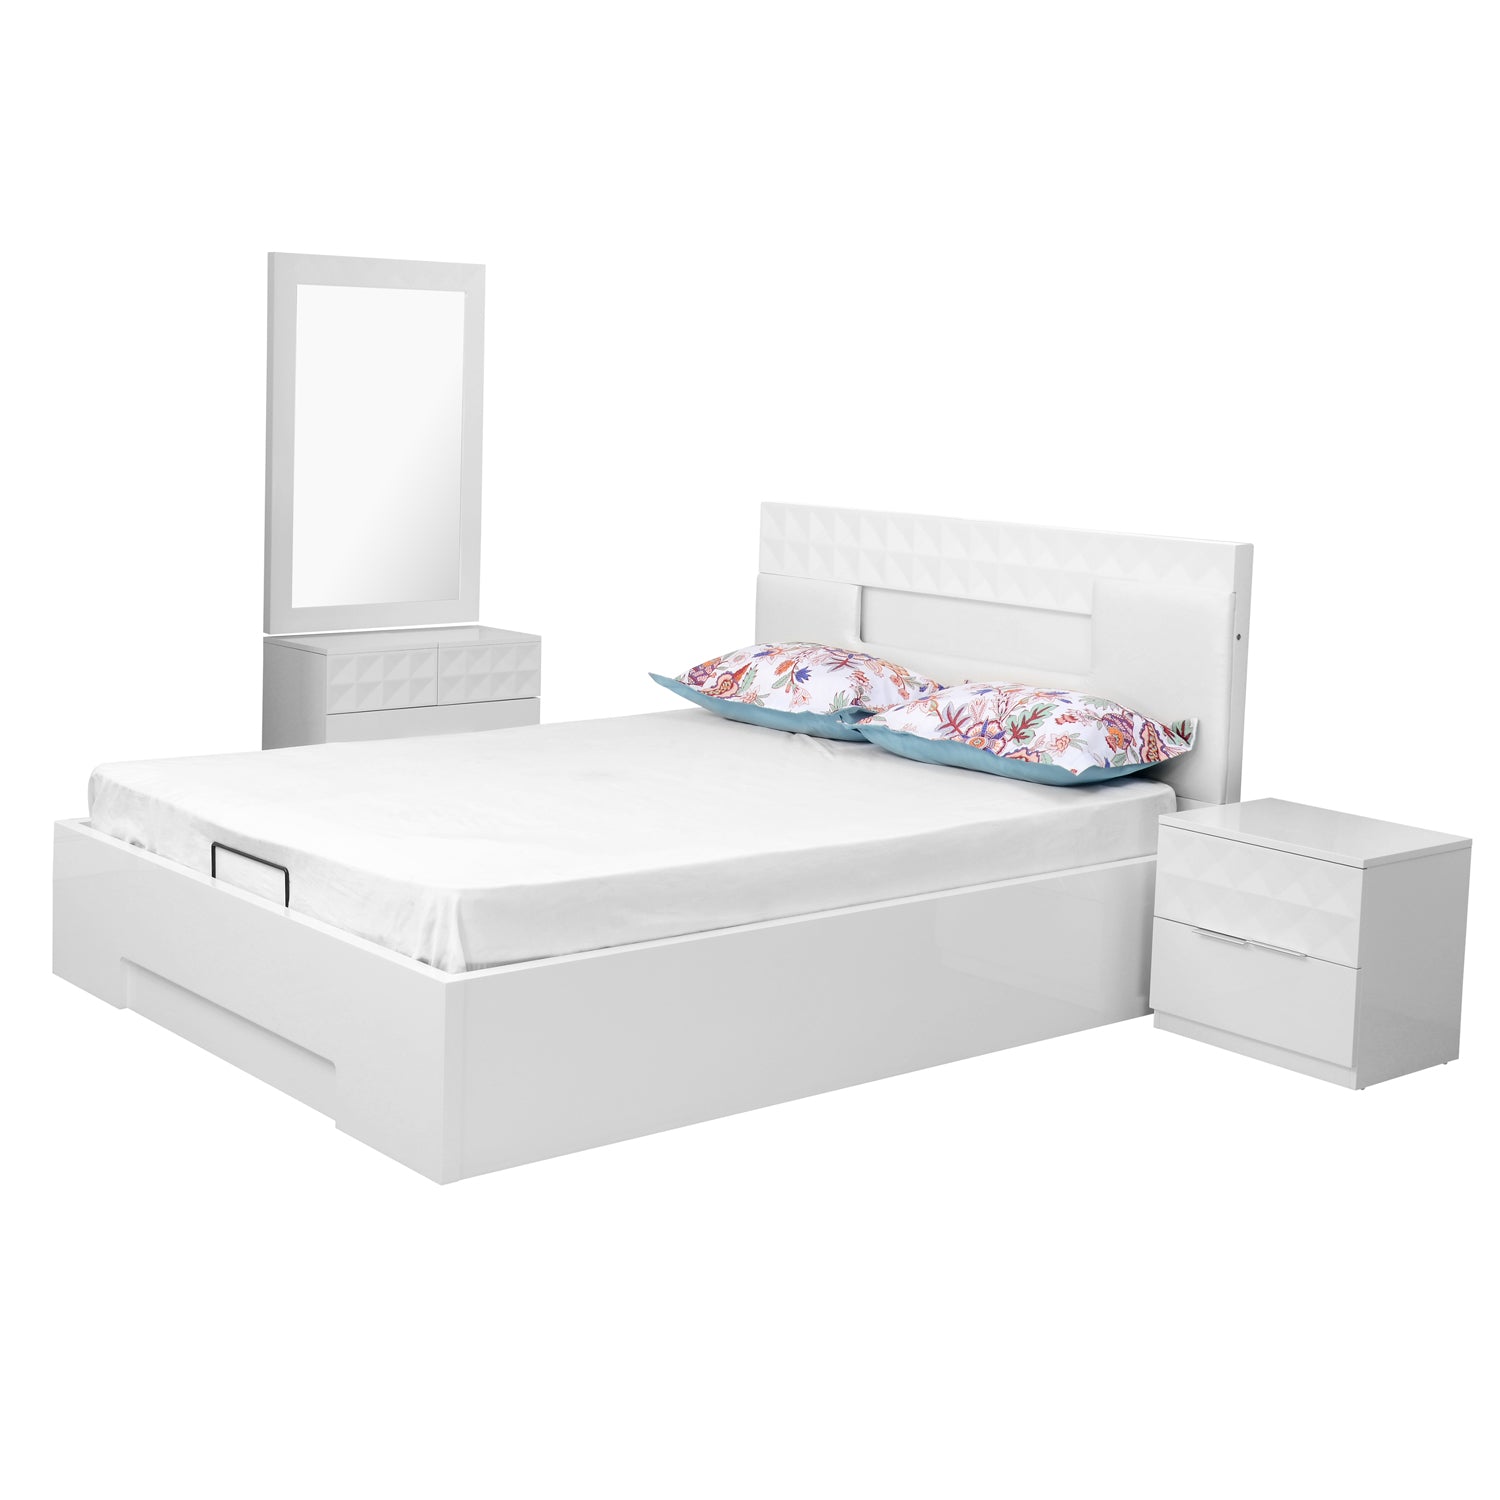 Theia King Bedroom Set with Night Stand And Dresser (White)